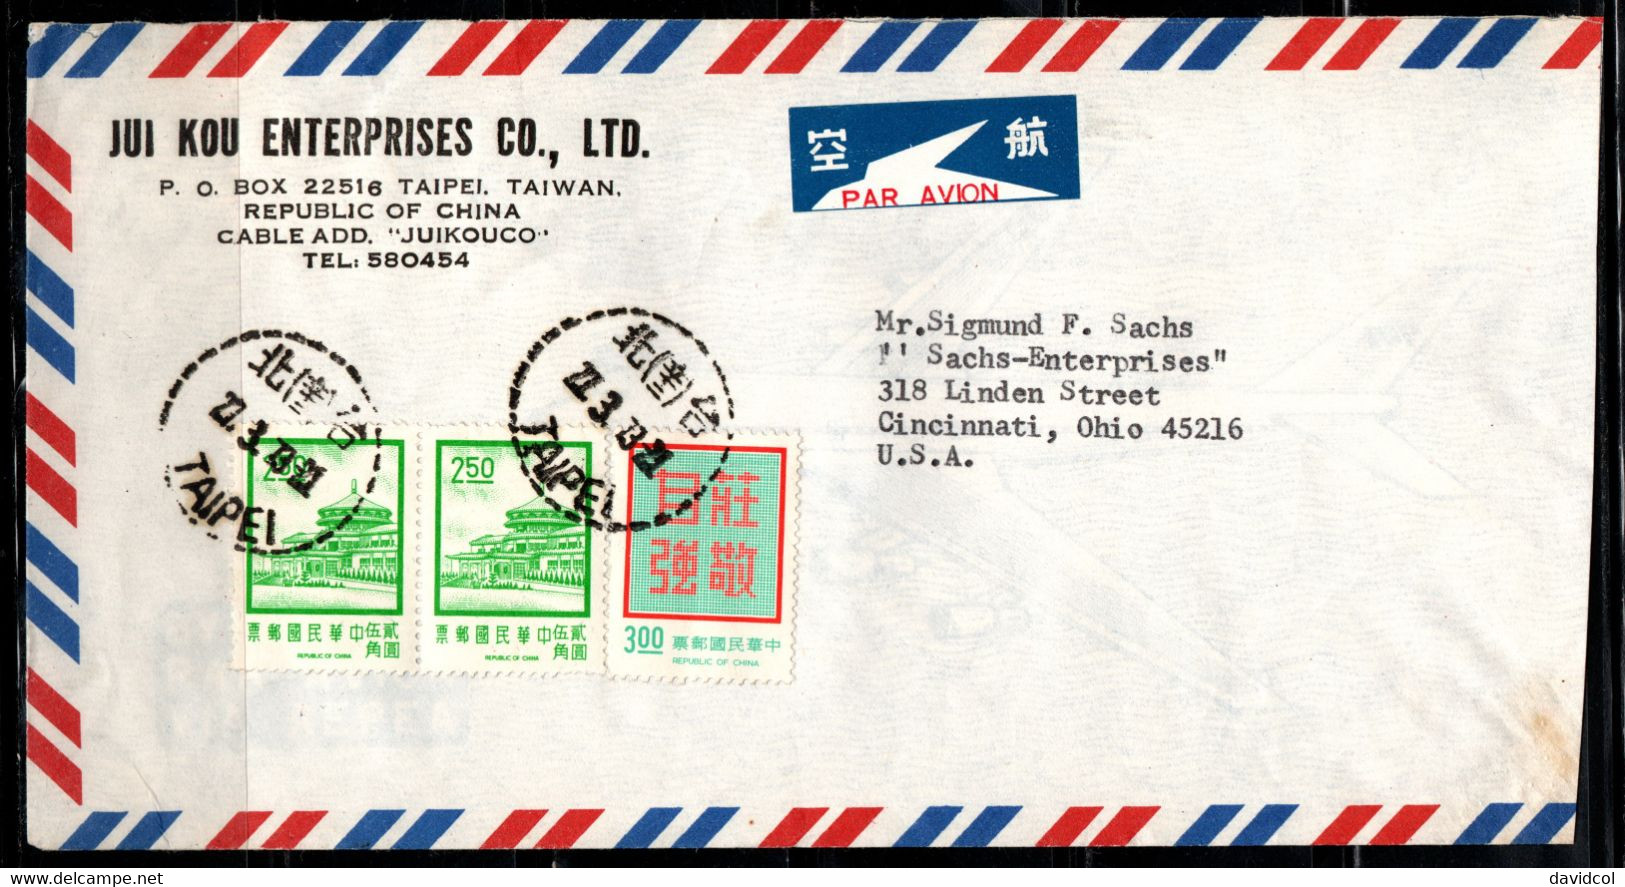 CA366- COVERAUCTION!!! - CHINA / TAIPEI 1973 TO USA - ARCHITECTURE - Covers & Documents